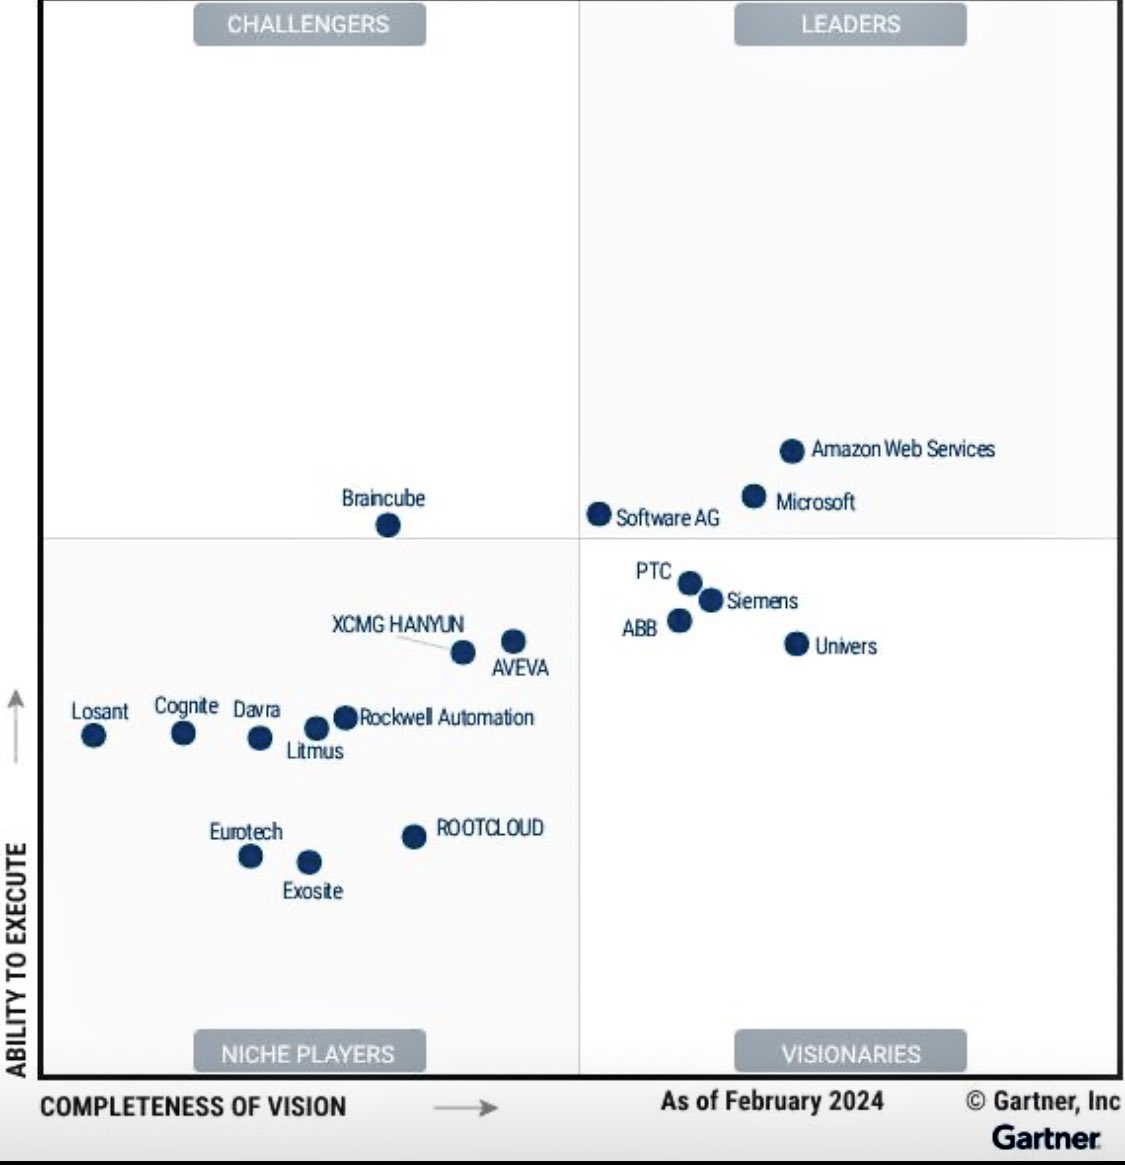 I’m absolutely thrilled to see @LosantHQ join the 2024 Gartner Global Magic Quadrant for Industrial #IoT Platforms. Now the whole world will see what I’ve known since I was introduced to Losant back in 2019. Charlie Key, Brandon Cannaday, Michael Kuehl and the rest of the #IIoT…